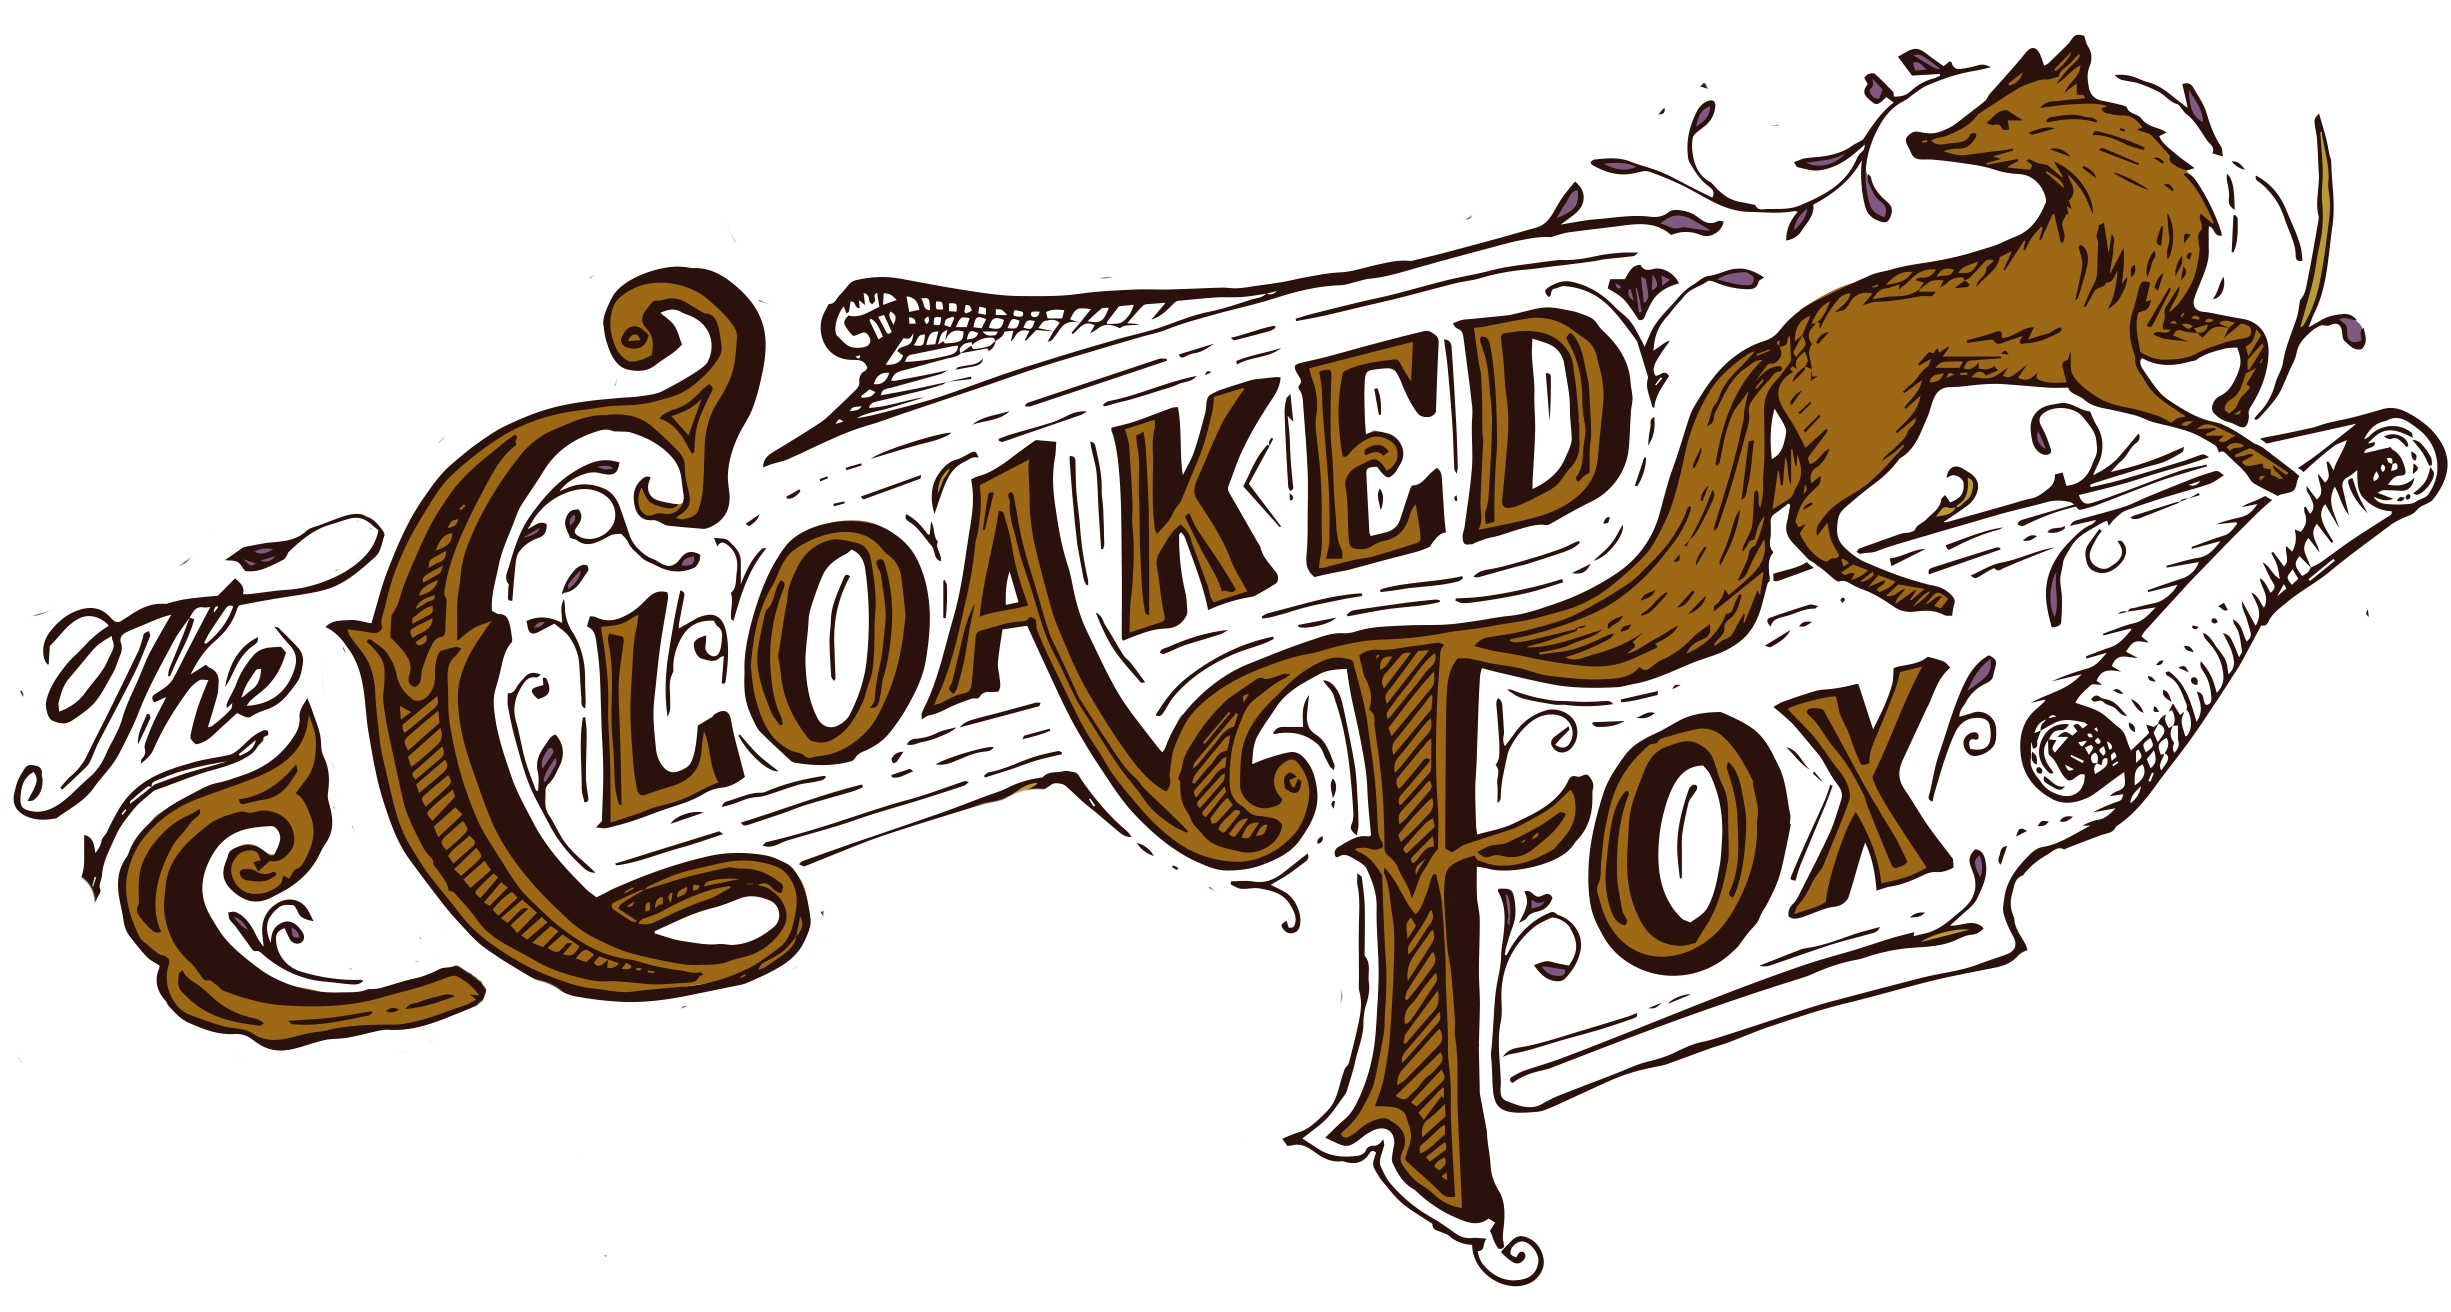 The Cloaked Fox